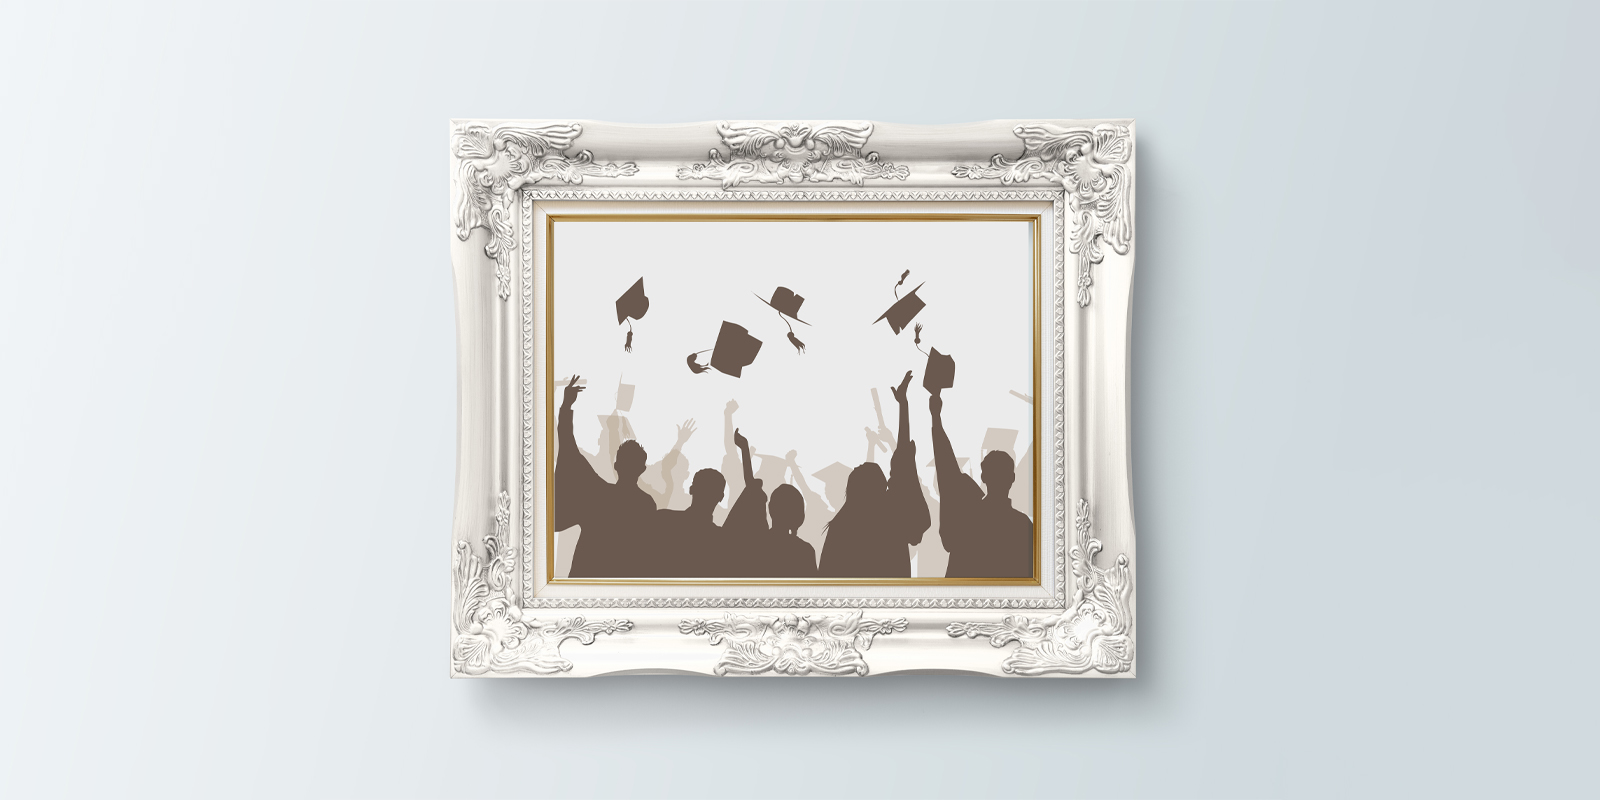 Graduation prints in Darwin - Print with Pagerr